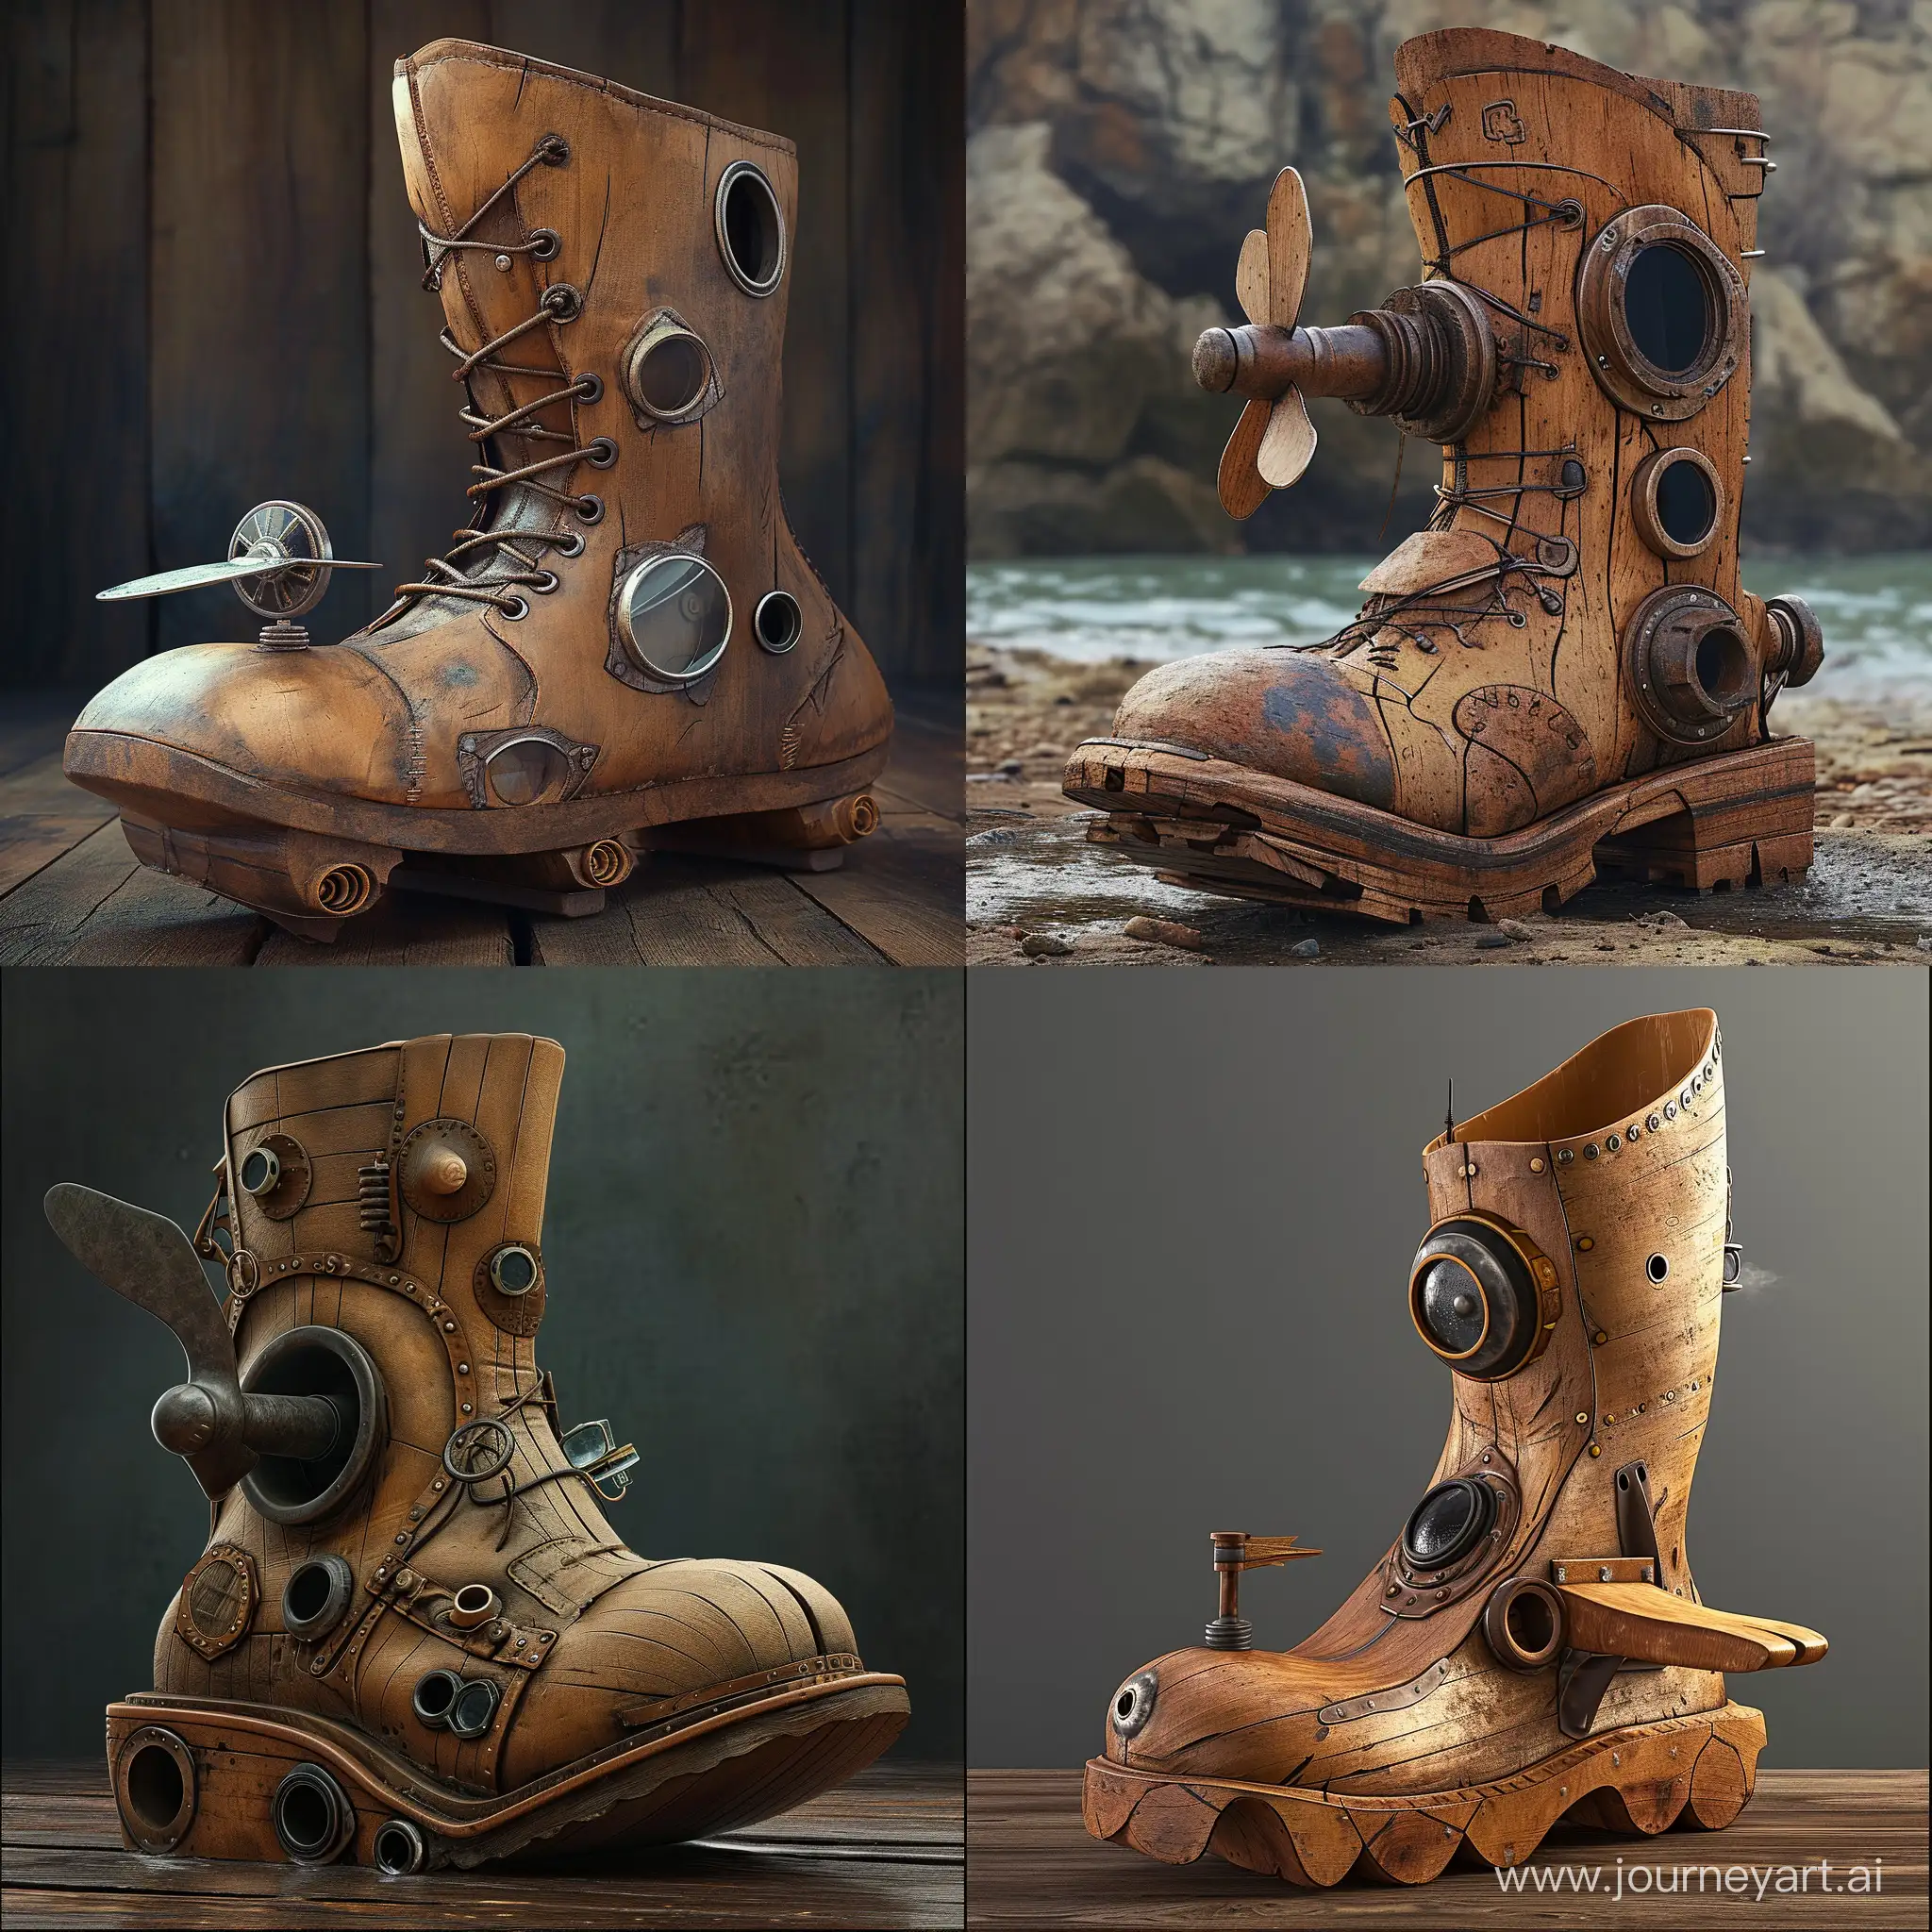 A giant's boot modified into a wooden submarine boot with a propeller on the back of the heel, a periscope, water tight, portholes. Epic composition. Highly detailed.
  